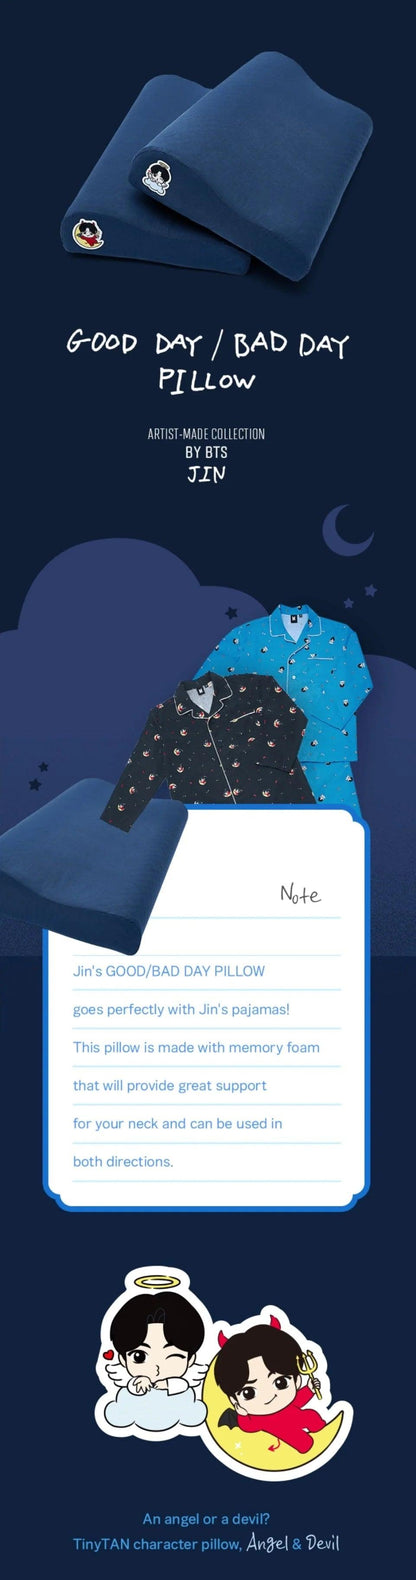 [2nd PRE ORDER] BTS - ARTIST-MADE COLLECTION by JIN - GOOD/BAD DAY PILLOW - KAEPJJANG SHOP (캡짱 숍)